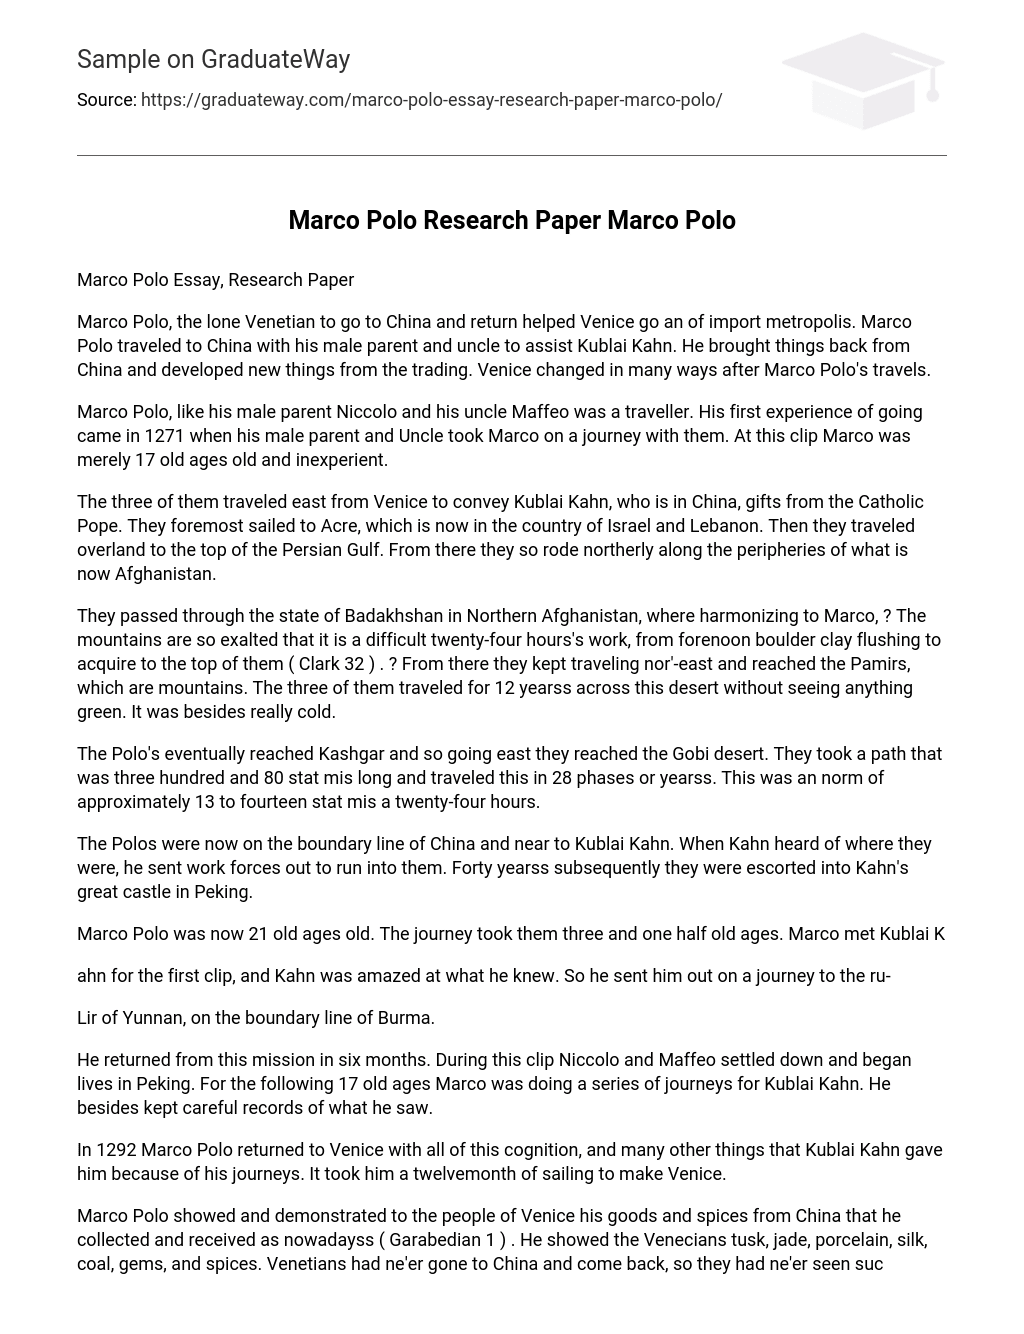 Marco Polo Research Paper